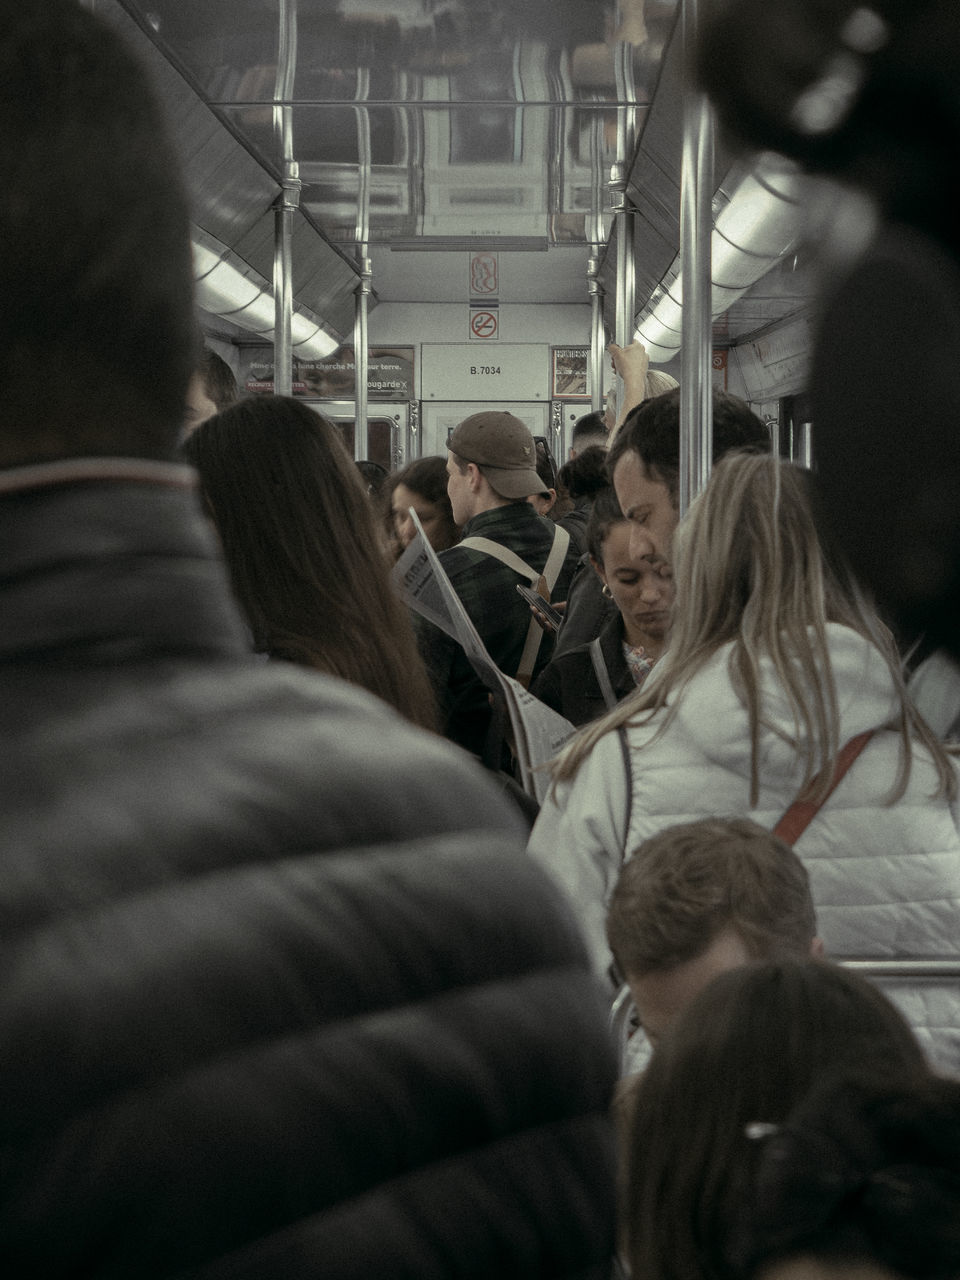 group of people, crowd, adult, women, indoors, large group of people, transportation, men, mode of transportation, public transportation, vehicle interior, rail transportation, travel, rear view, train, selective focus, group, passenger, architecture, person, journey